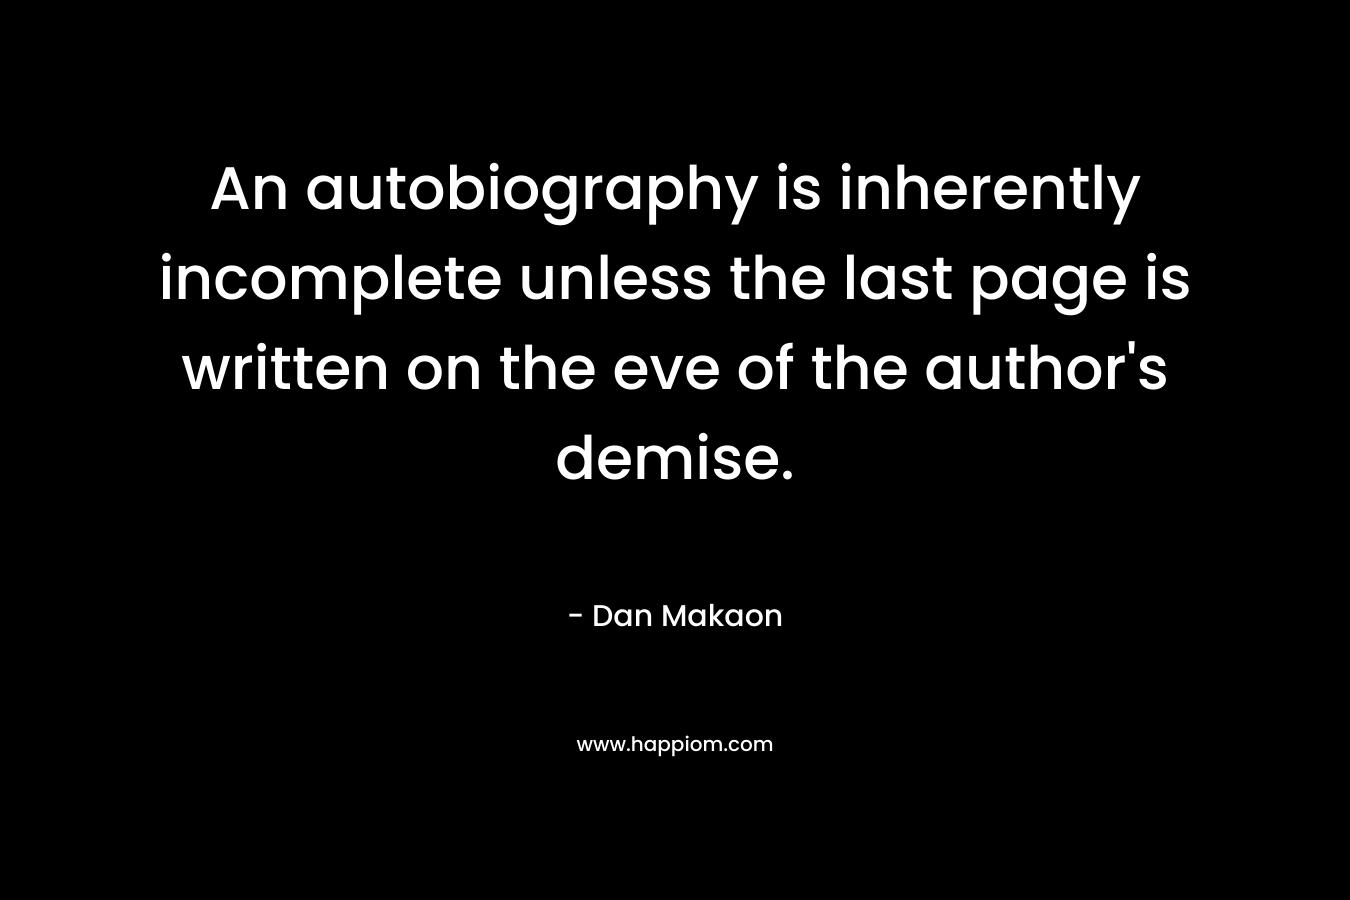 An autobiography is inherently incomplete unless the last page is written on the eve of the author’s demise. – Dan Makaon